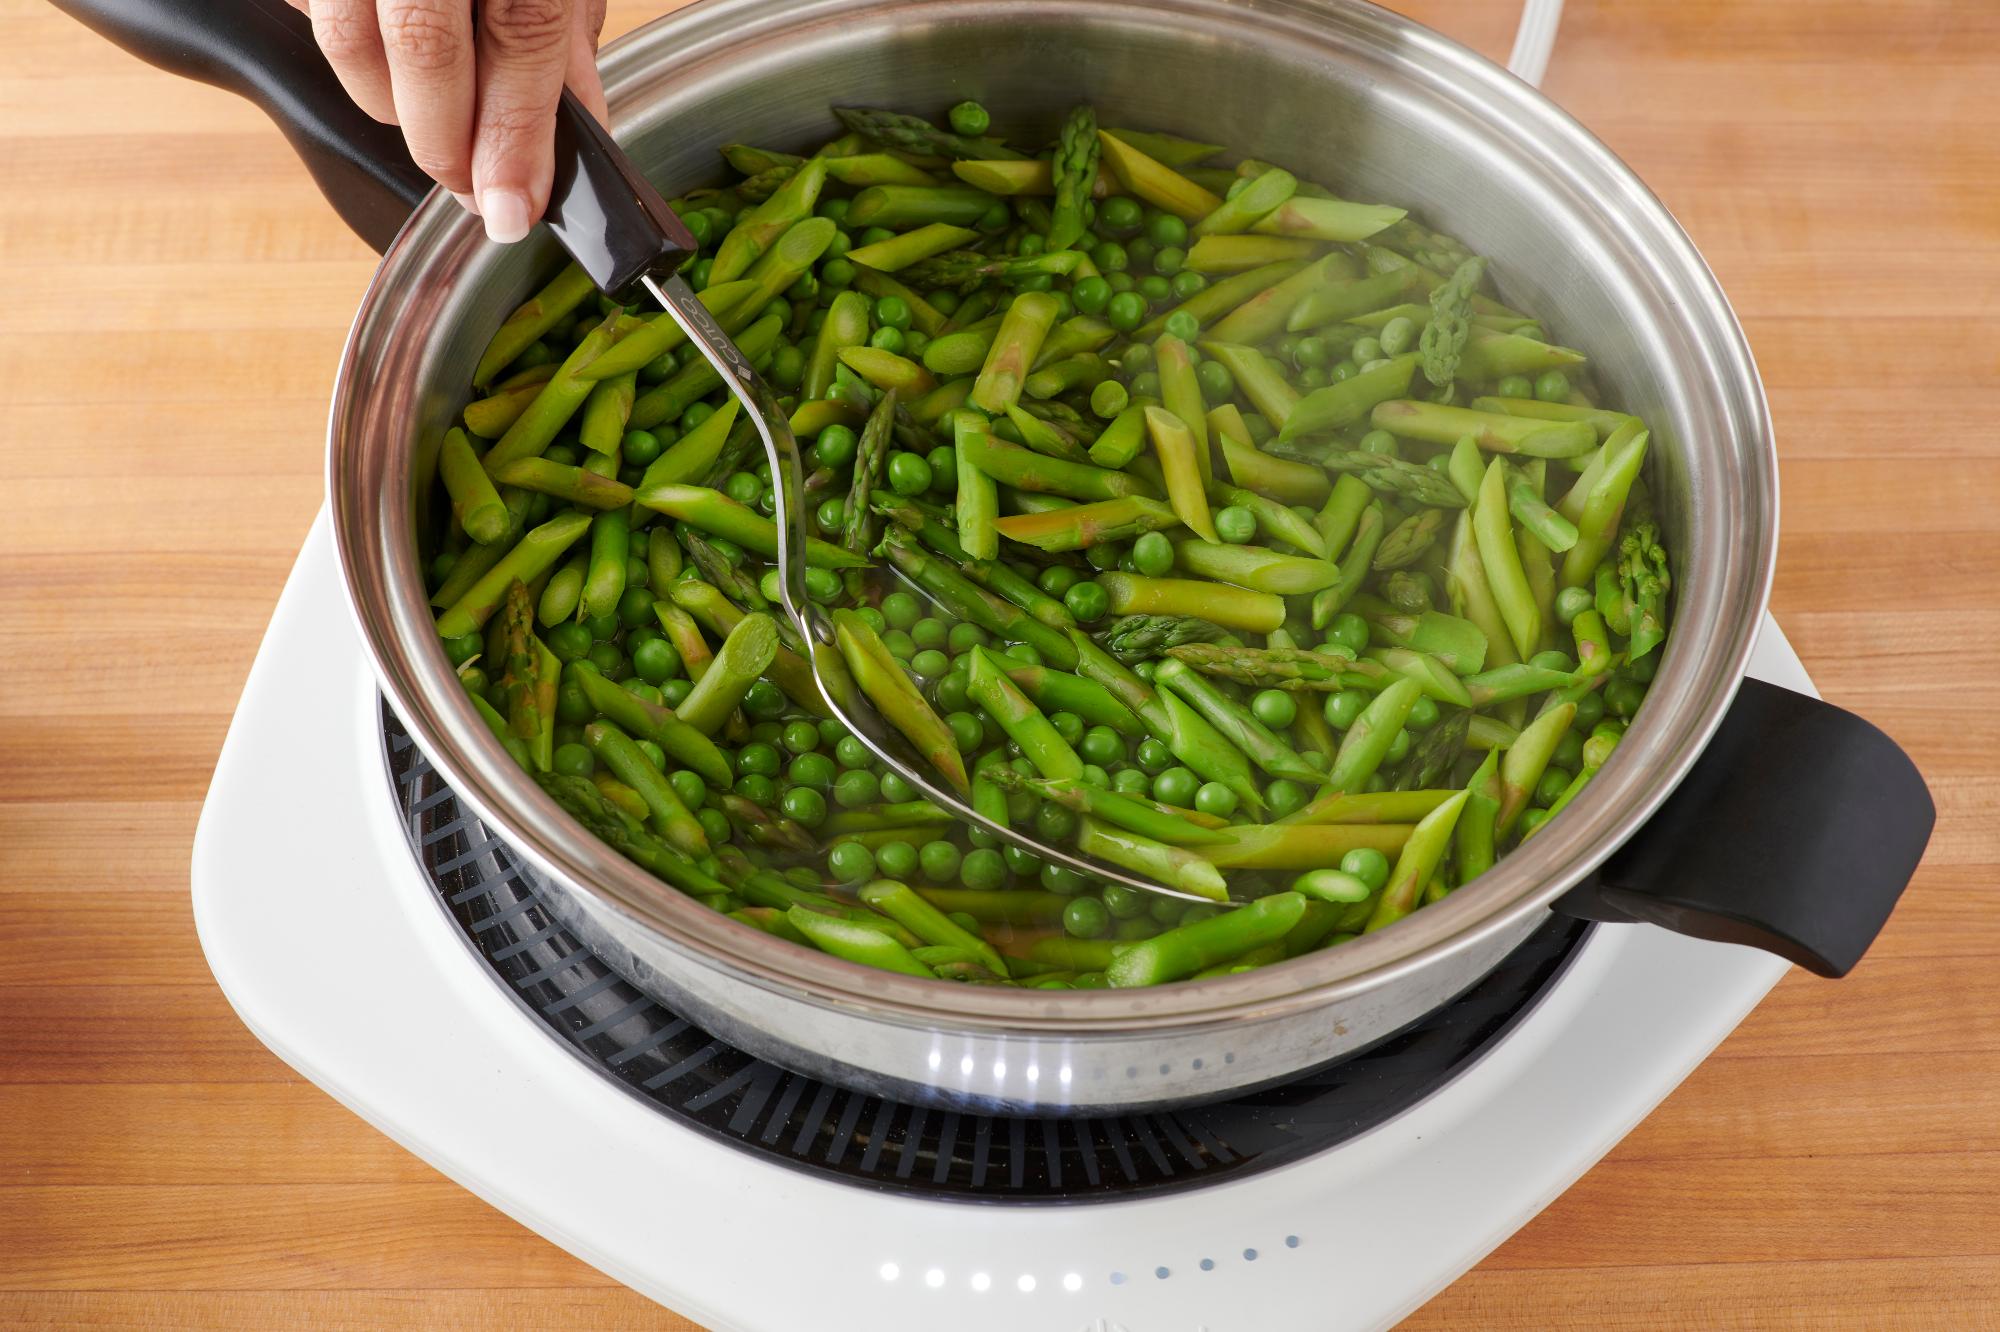 Cooking the peas and asparagus.